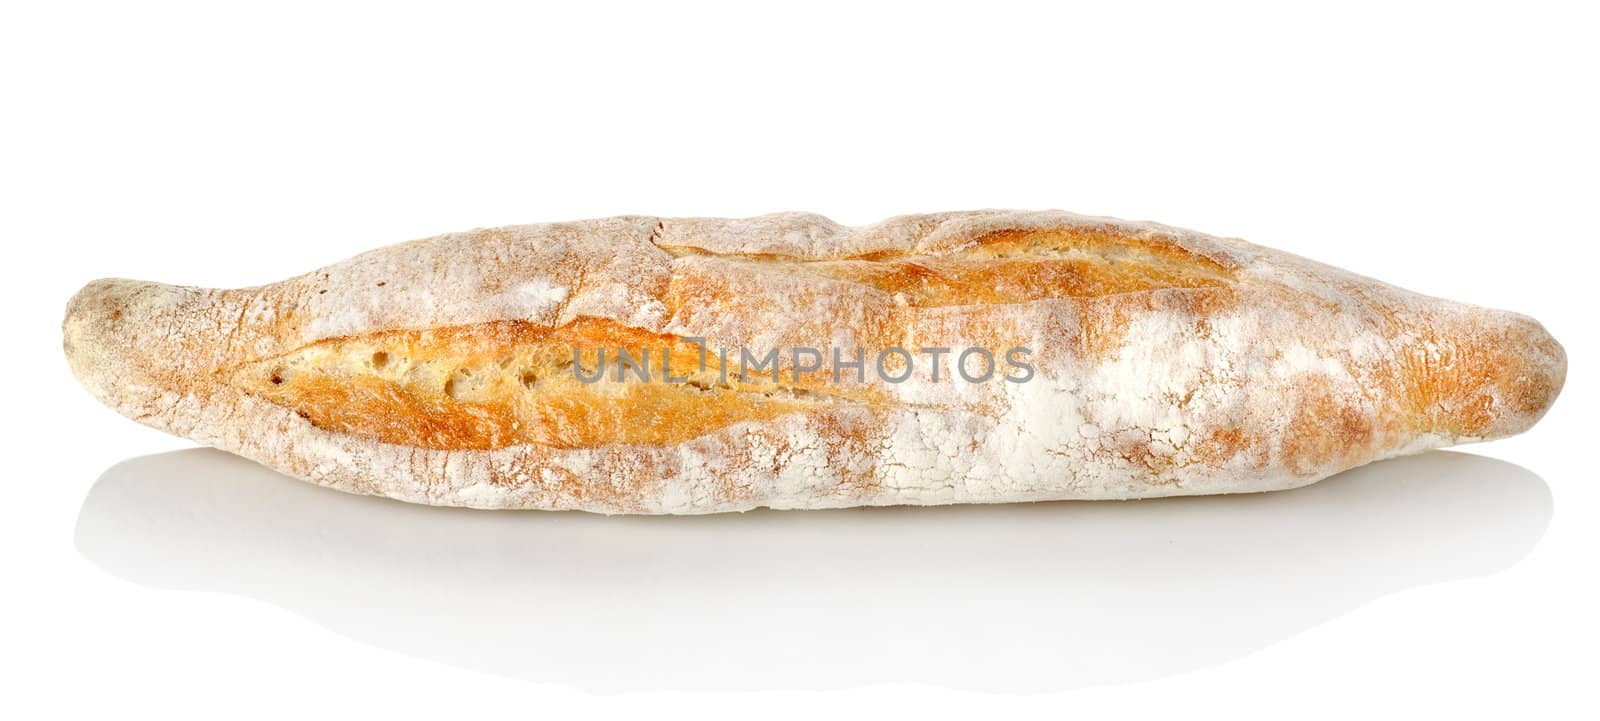 French bread isolated on a white background